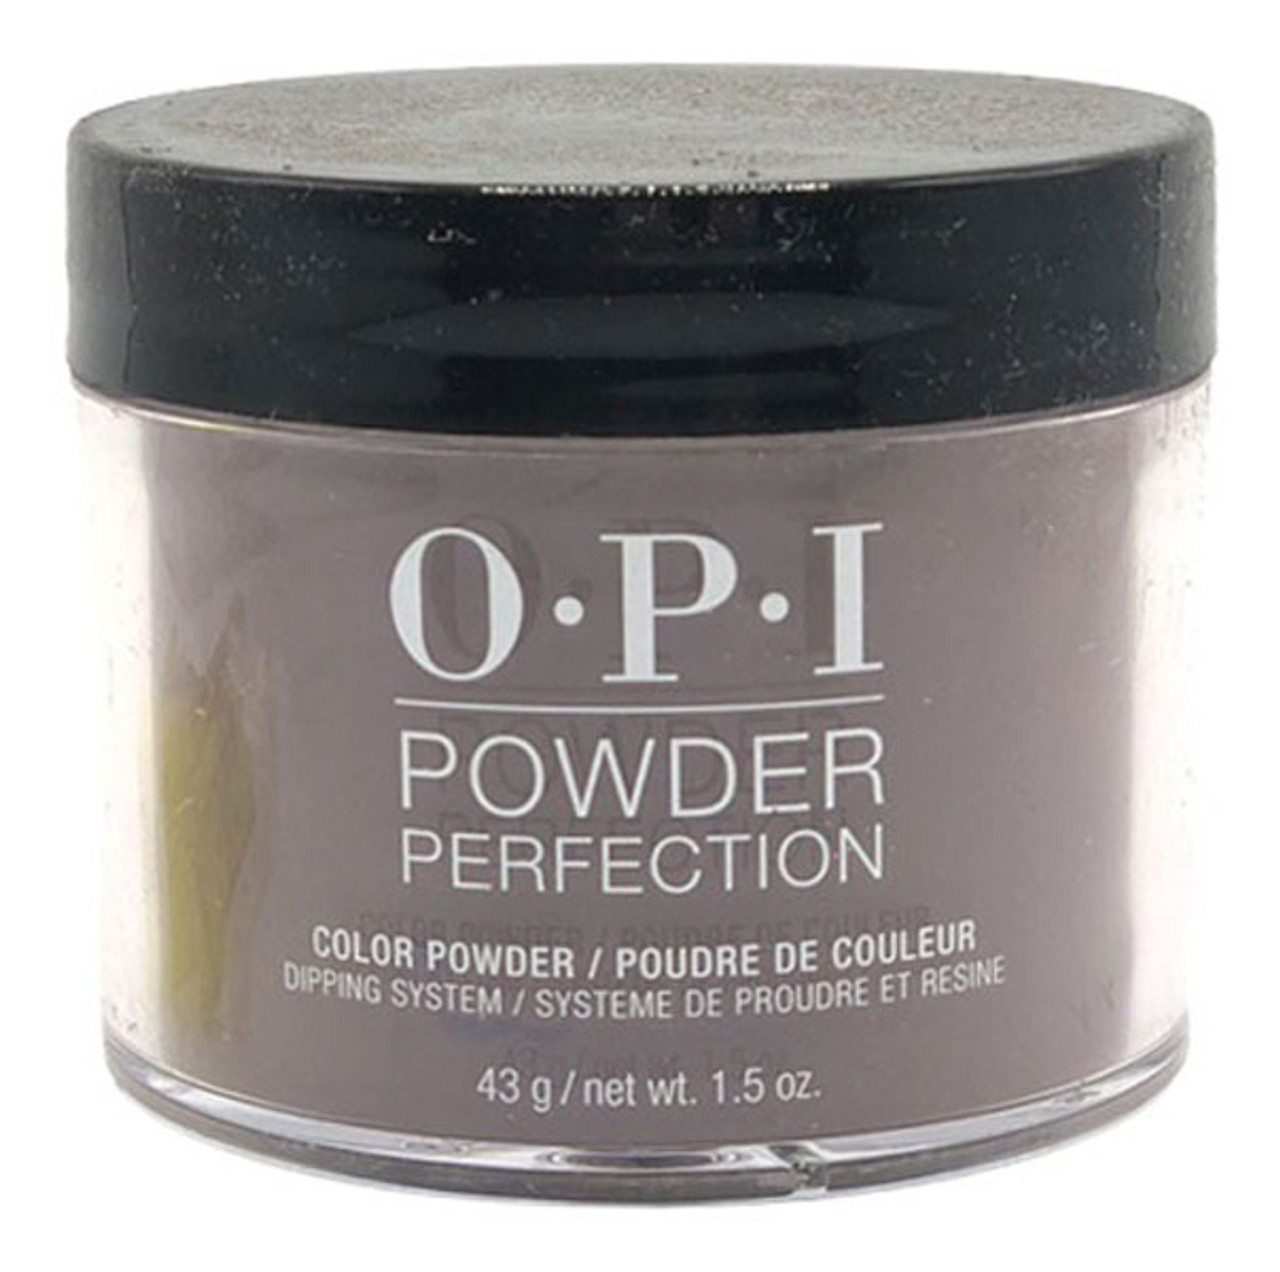 OPI Dipping Powder Perfection Brown to earth - 1.5 oz / 43 G